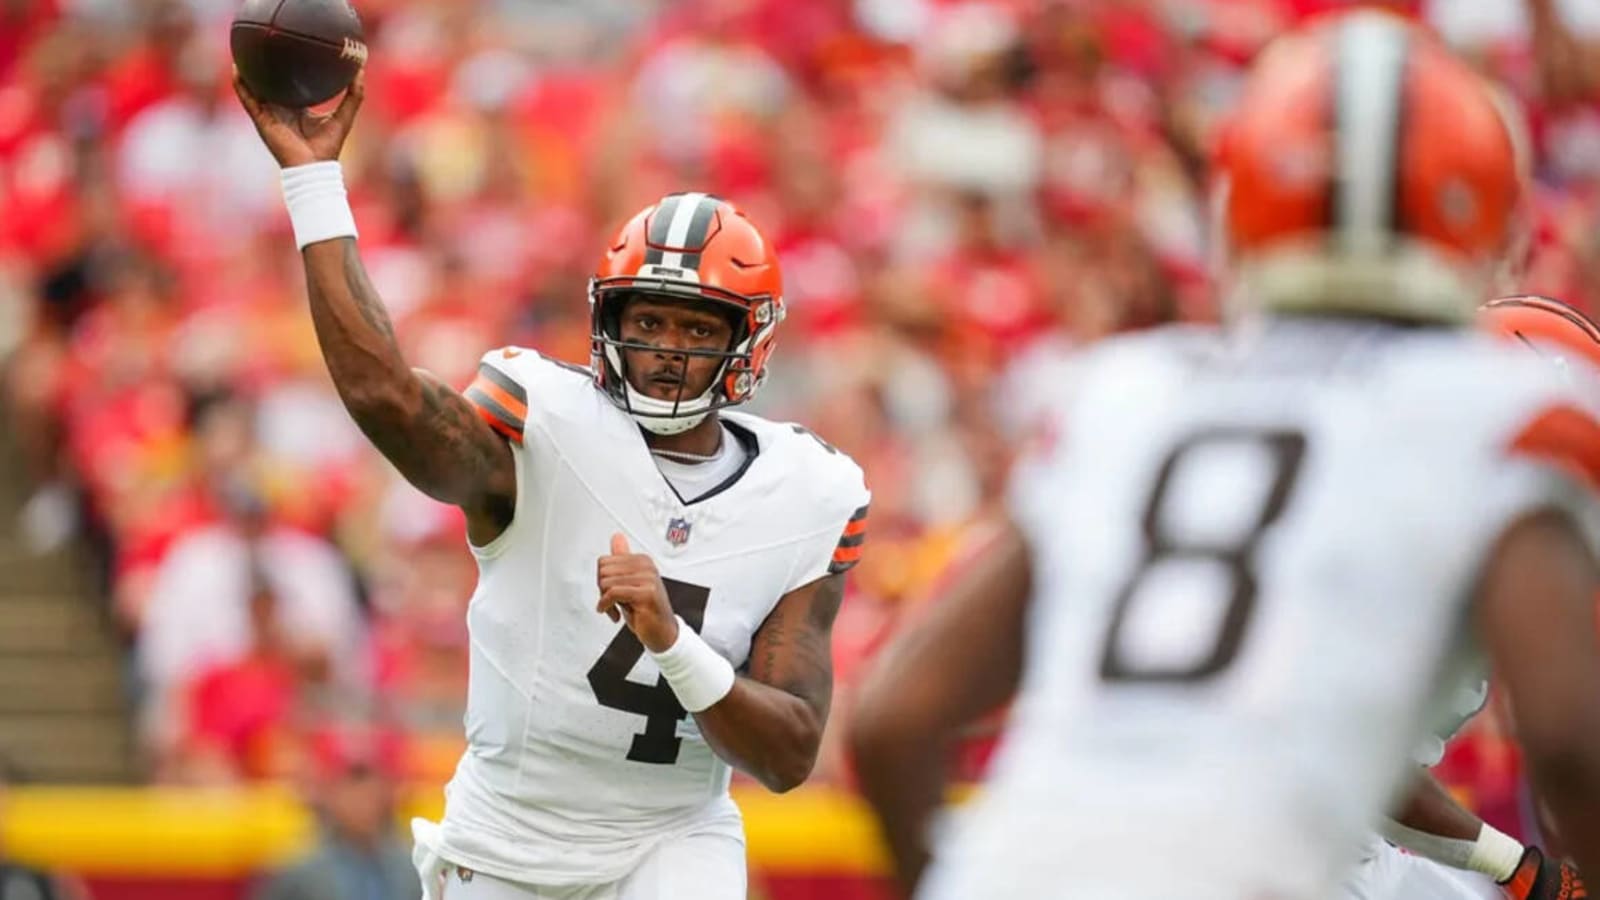 Oddsmakers just told us everything we need to know about the Browns vs. Cowboys Week 1 game